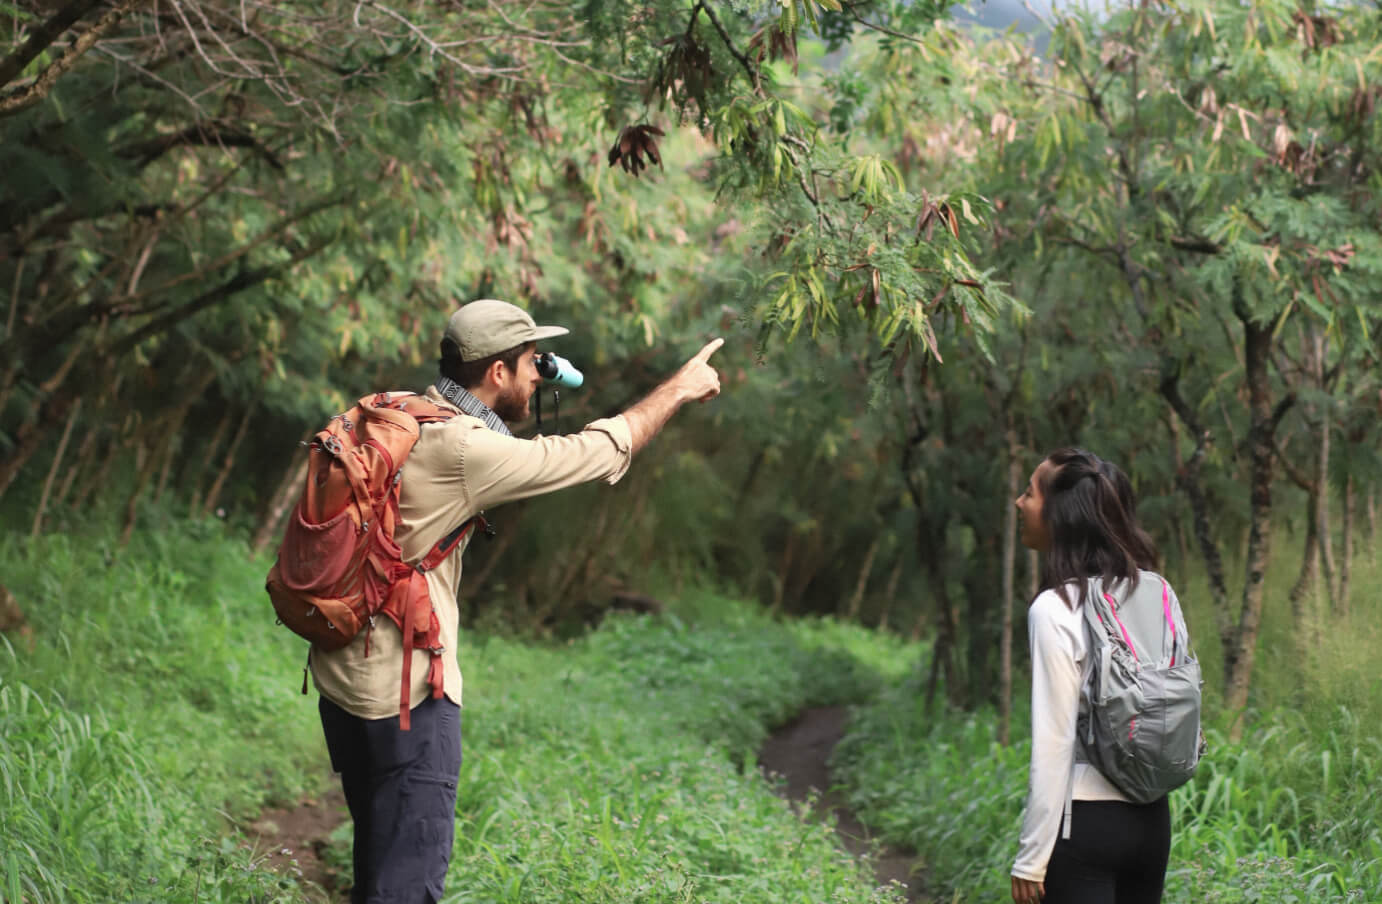 Peter Thoene pointing something out in a forest to a girl, while holding Nocs